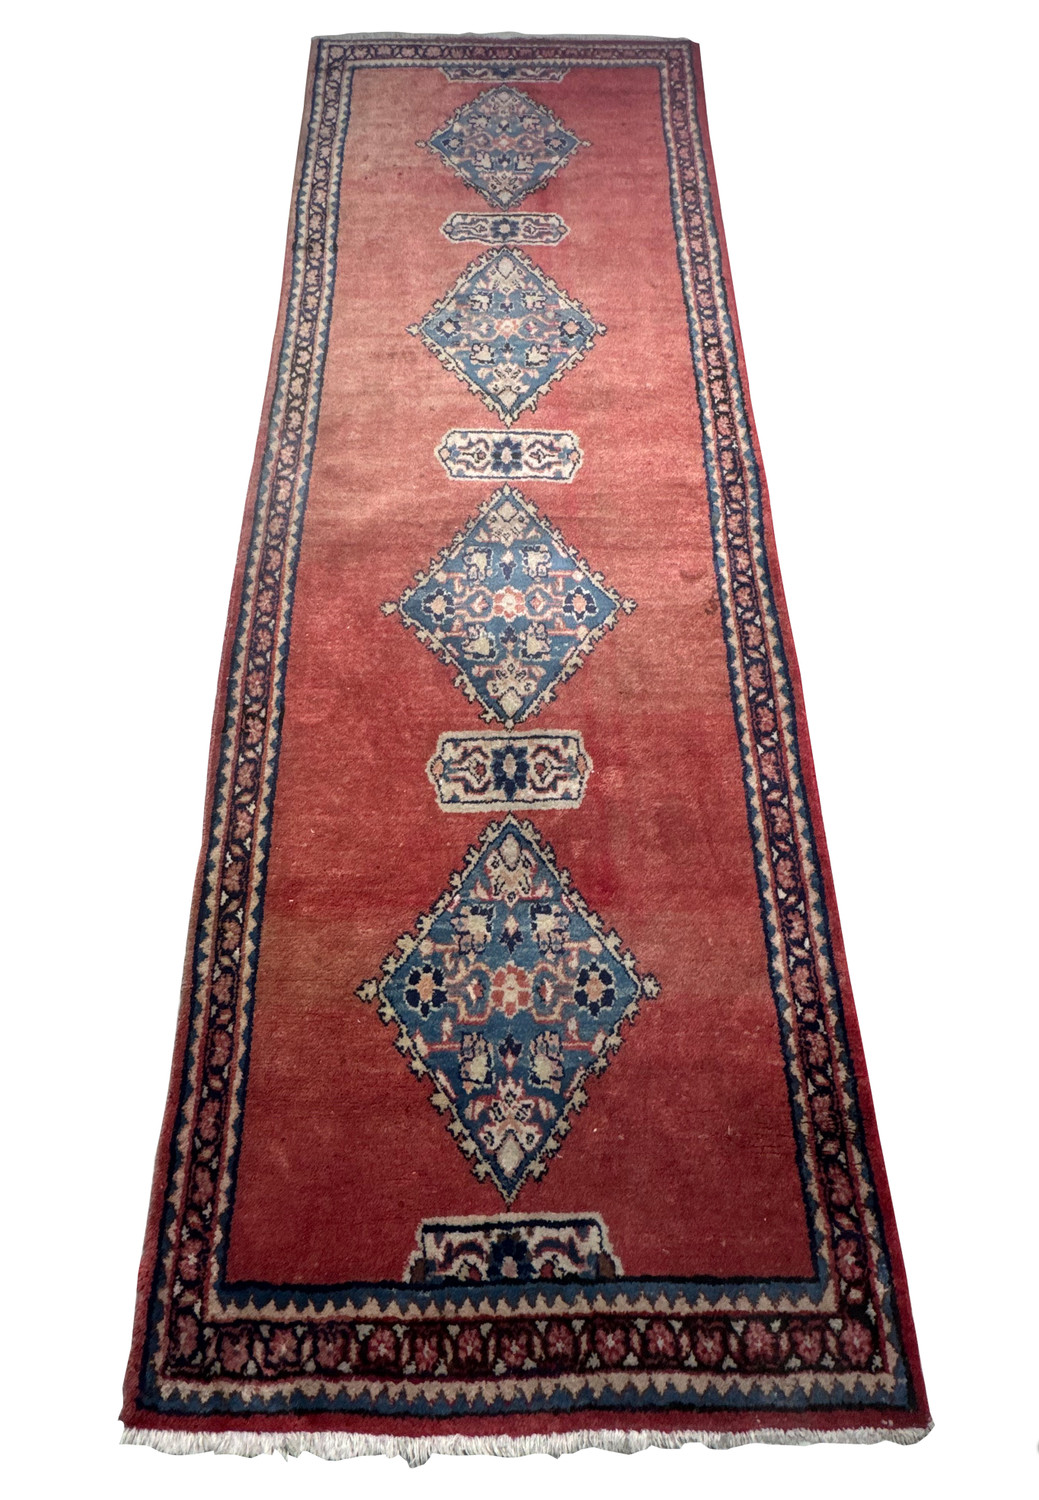 Persian Hamedan runner rug laid on the floor with detailed medallions and a floral border pattern